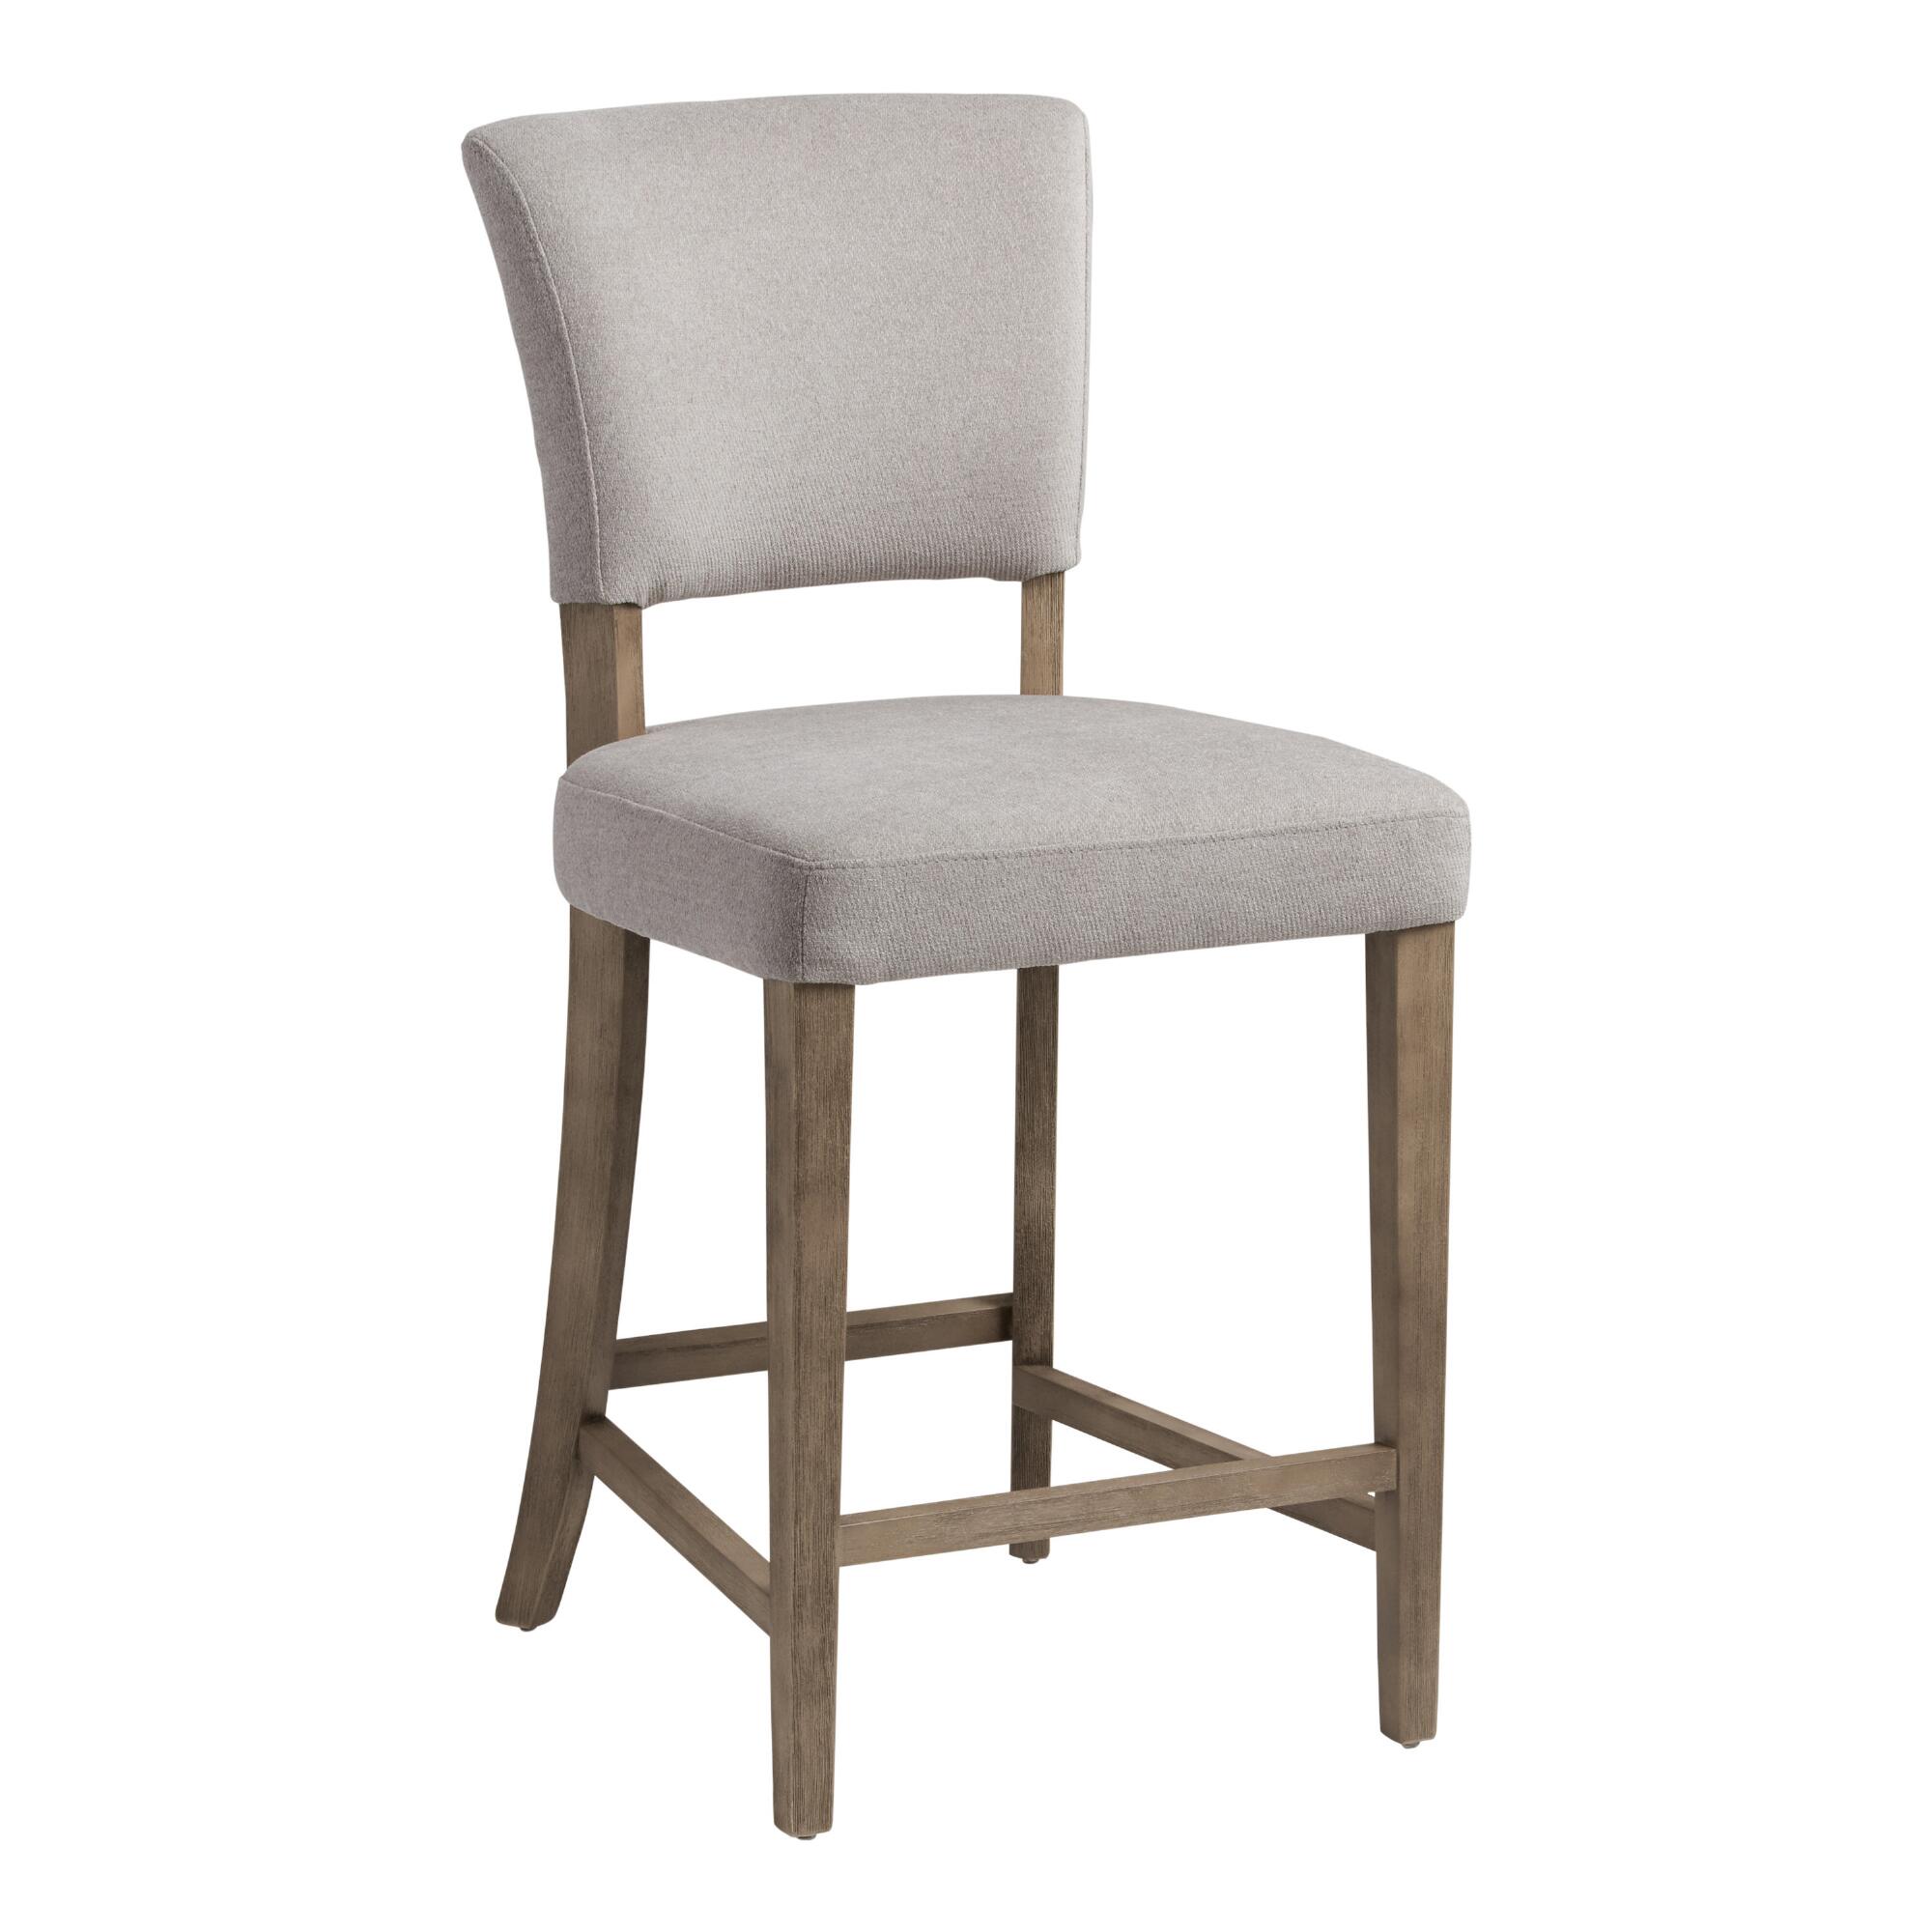 Gray Joelle Upholstered Counter Stool: Brown/Gray/Wood - Fabric by World Market